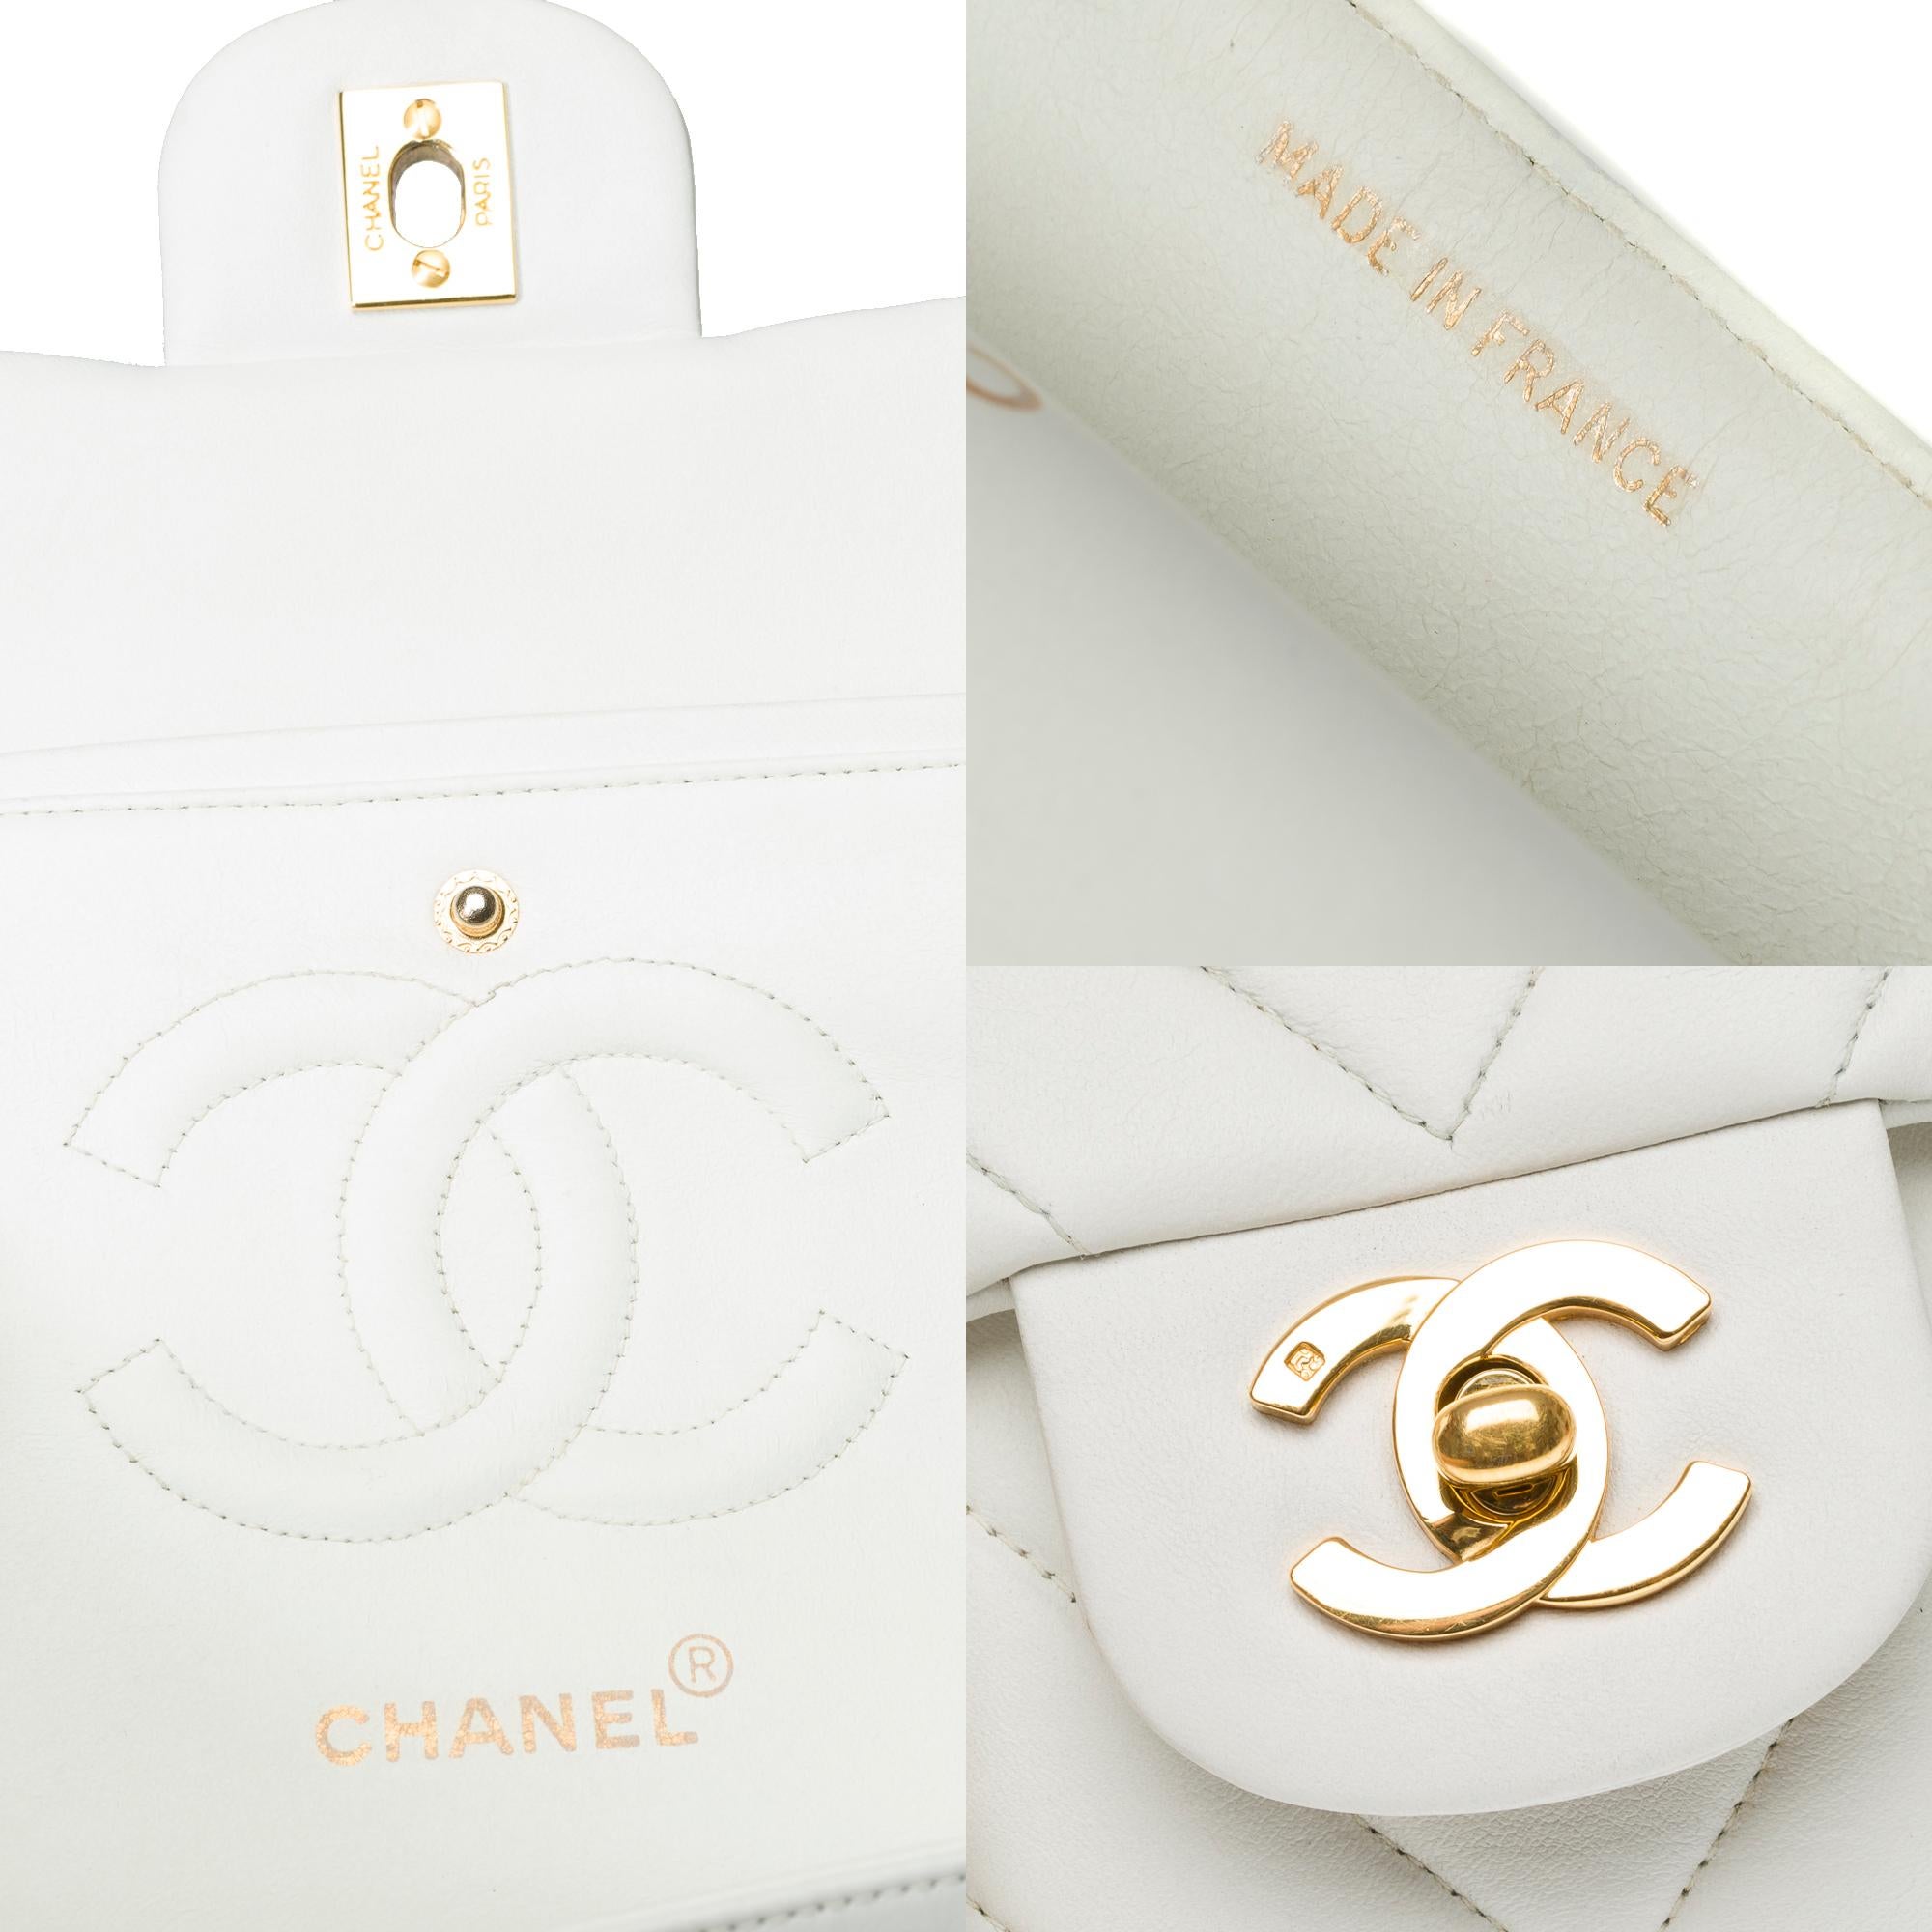 Chanel Timeless double flap shoulder bag in white herringbone quilted lamb, GHW 2